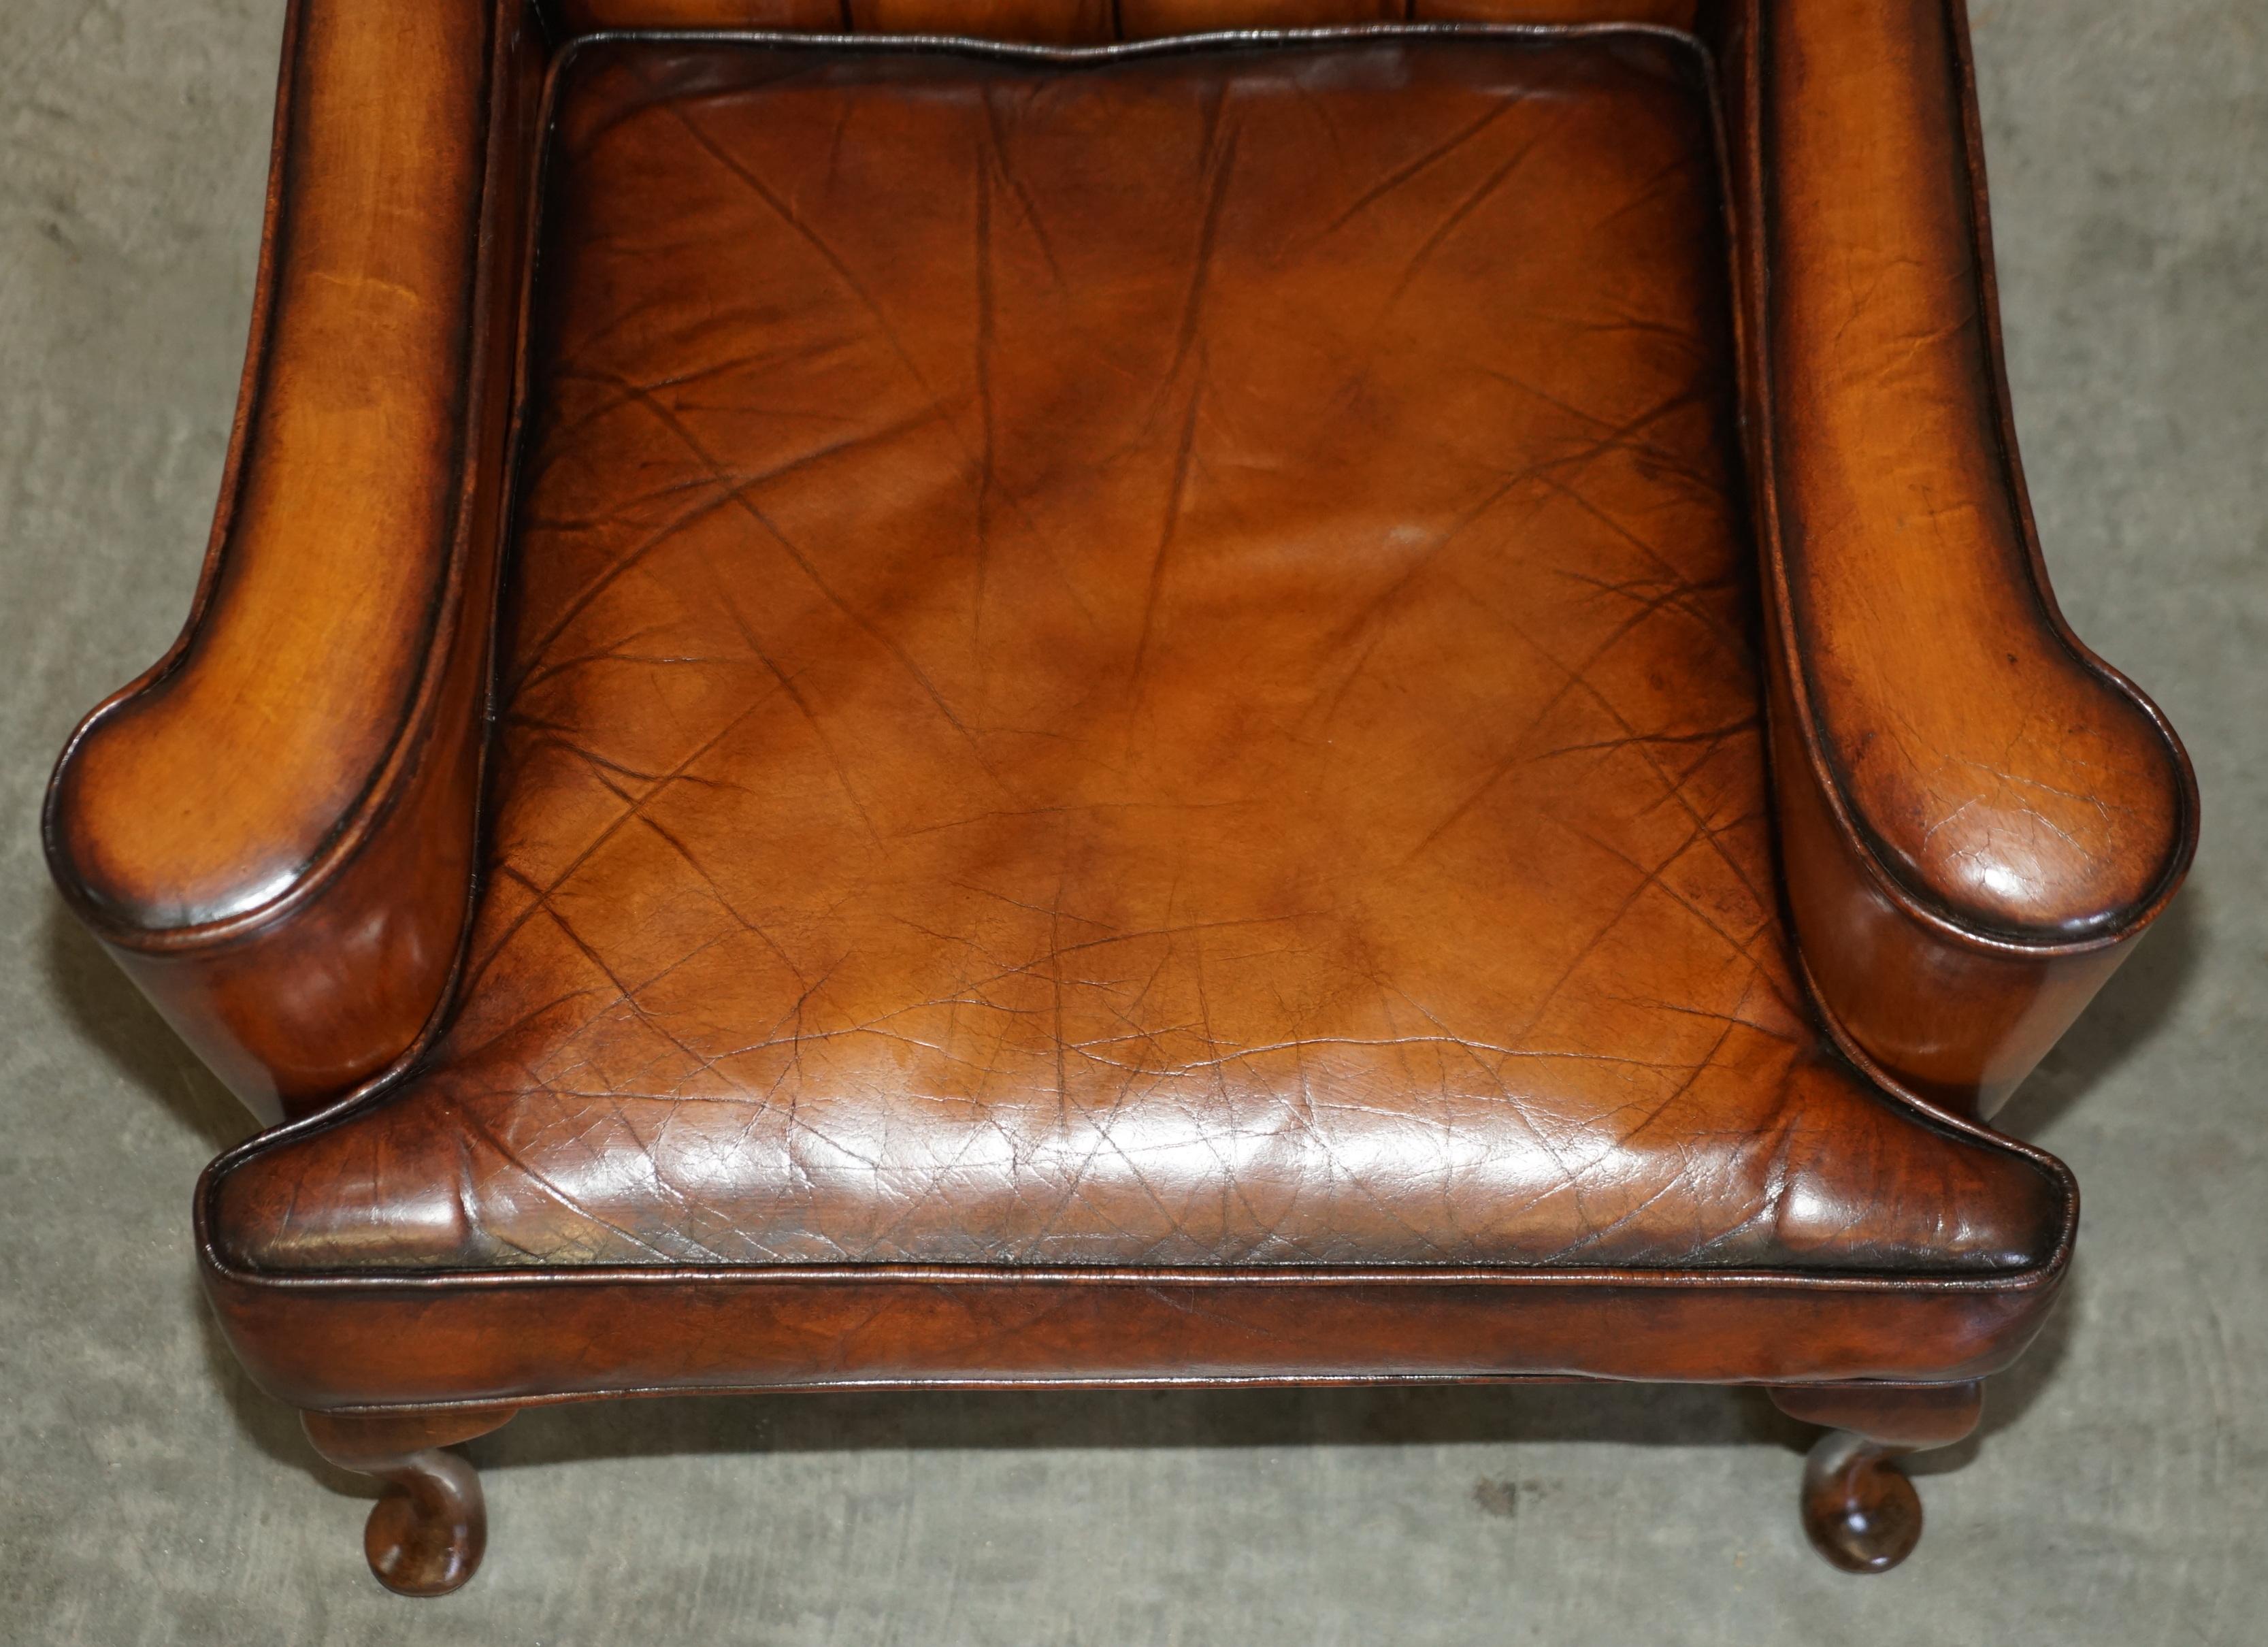 PAIR OF ANTIQUE WILLIAM MORRIS WiNGBACK ARMCHAIRS HAND DYED CIGAR BROWN LEATHER For Sale 3